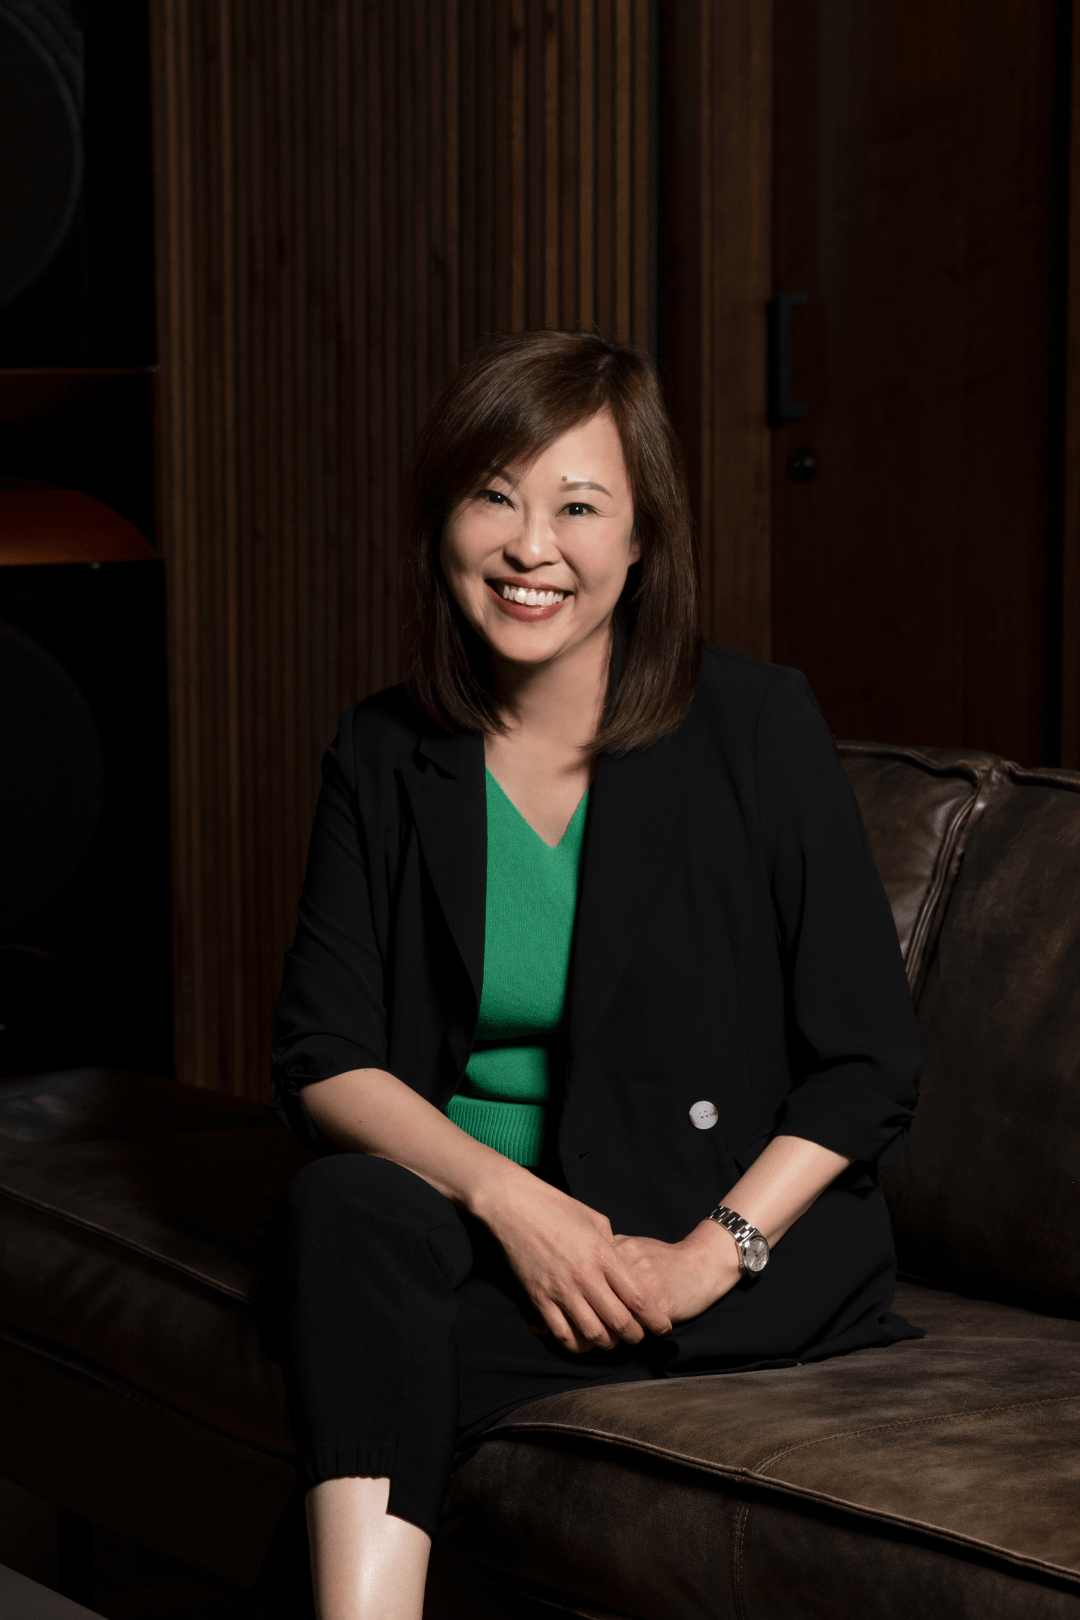 Jennifer Cheung, the general manager of EAST Hong Kong from Swire Hotels